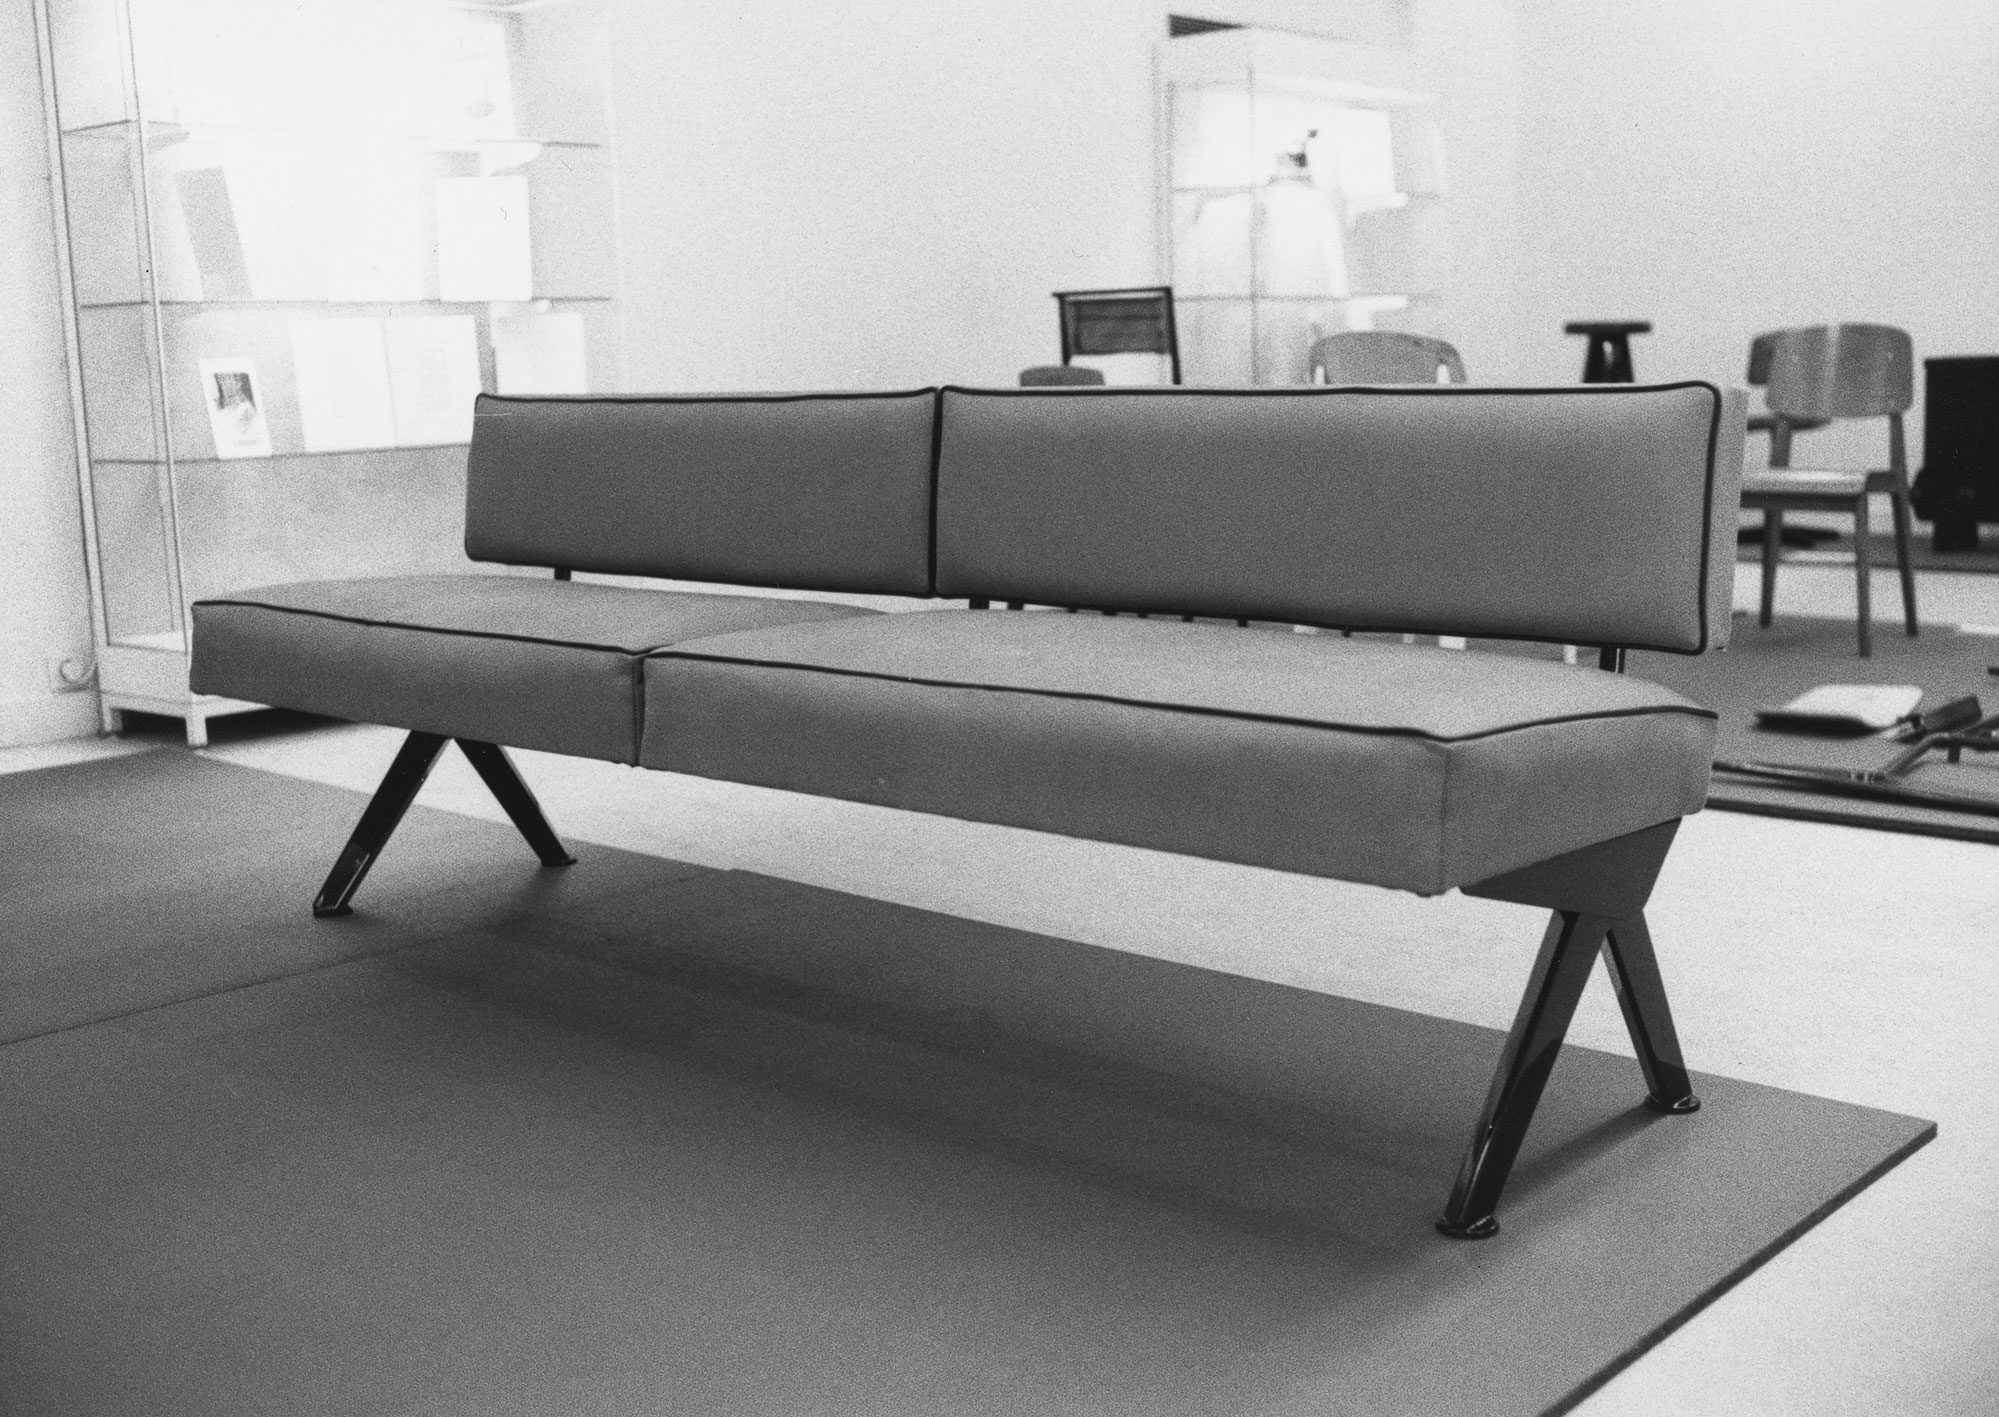 Bench, variant with cushions, 1955.